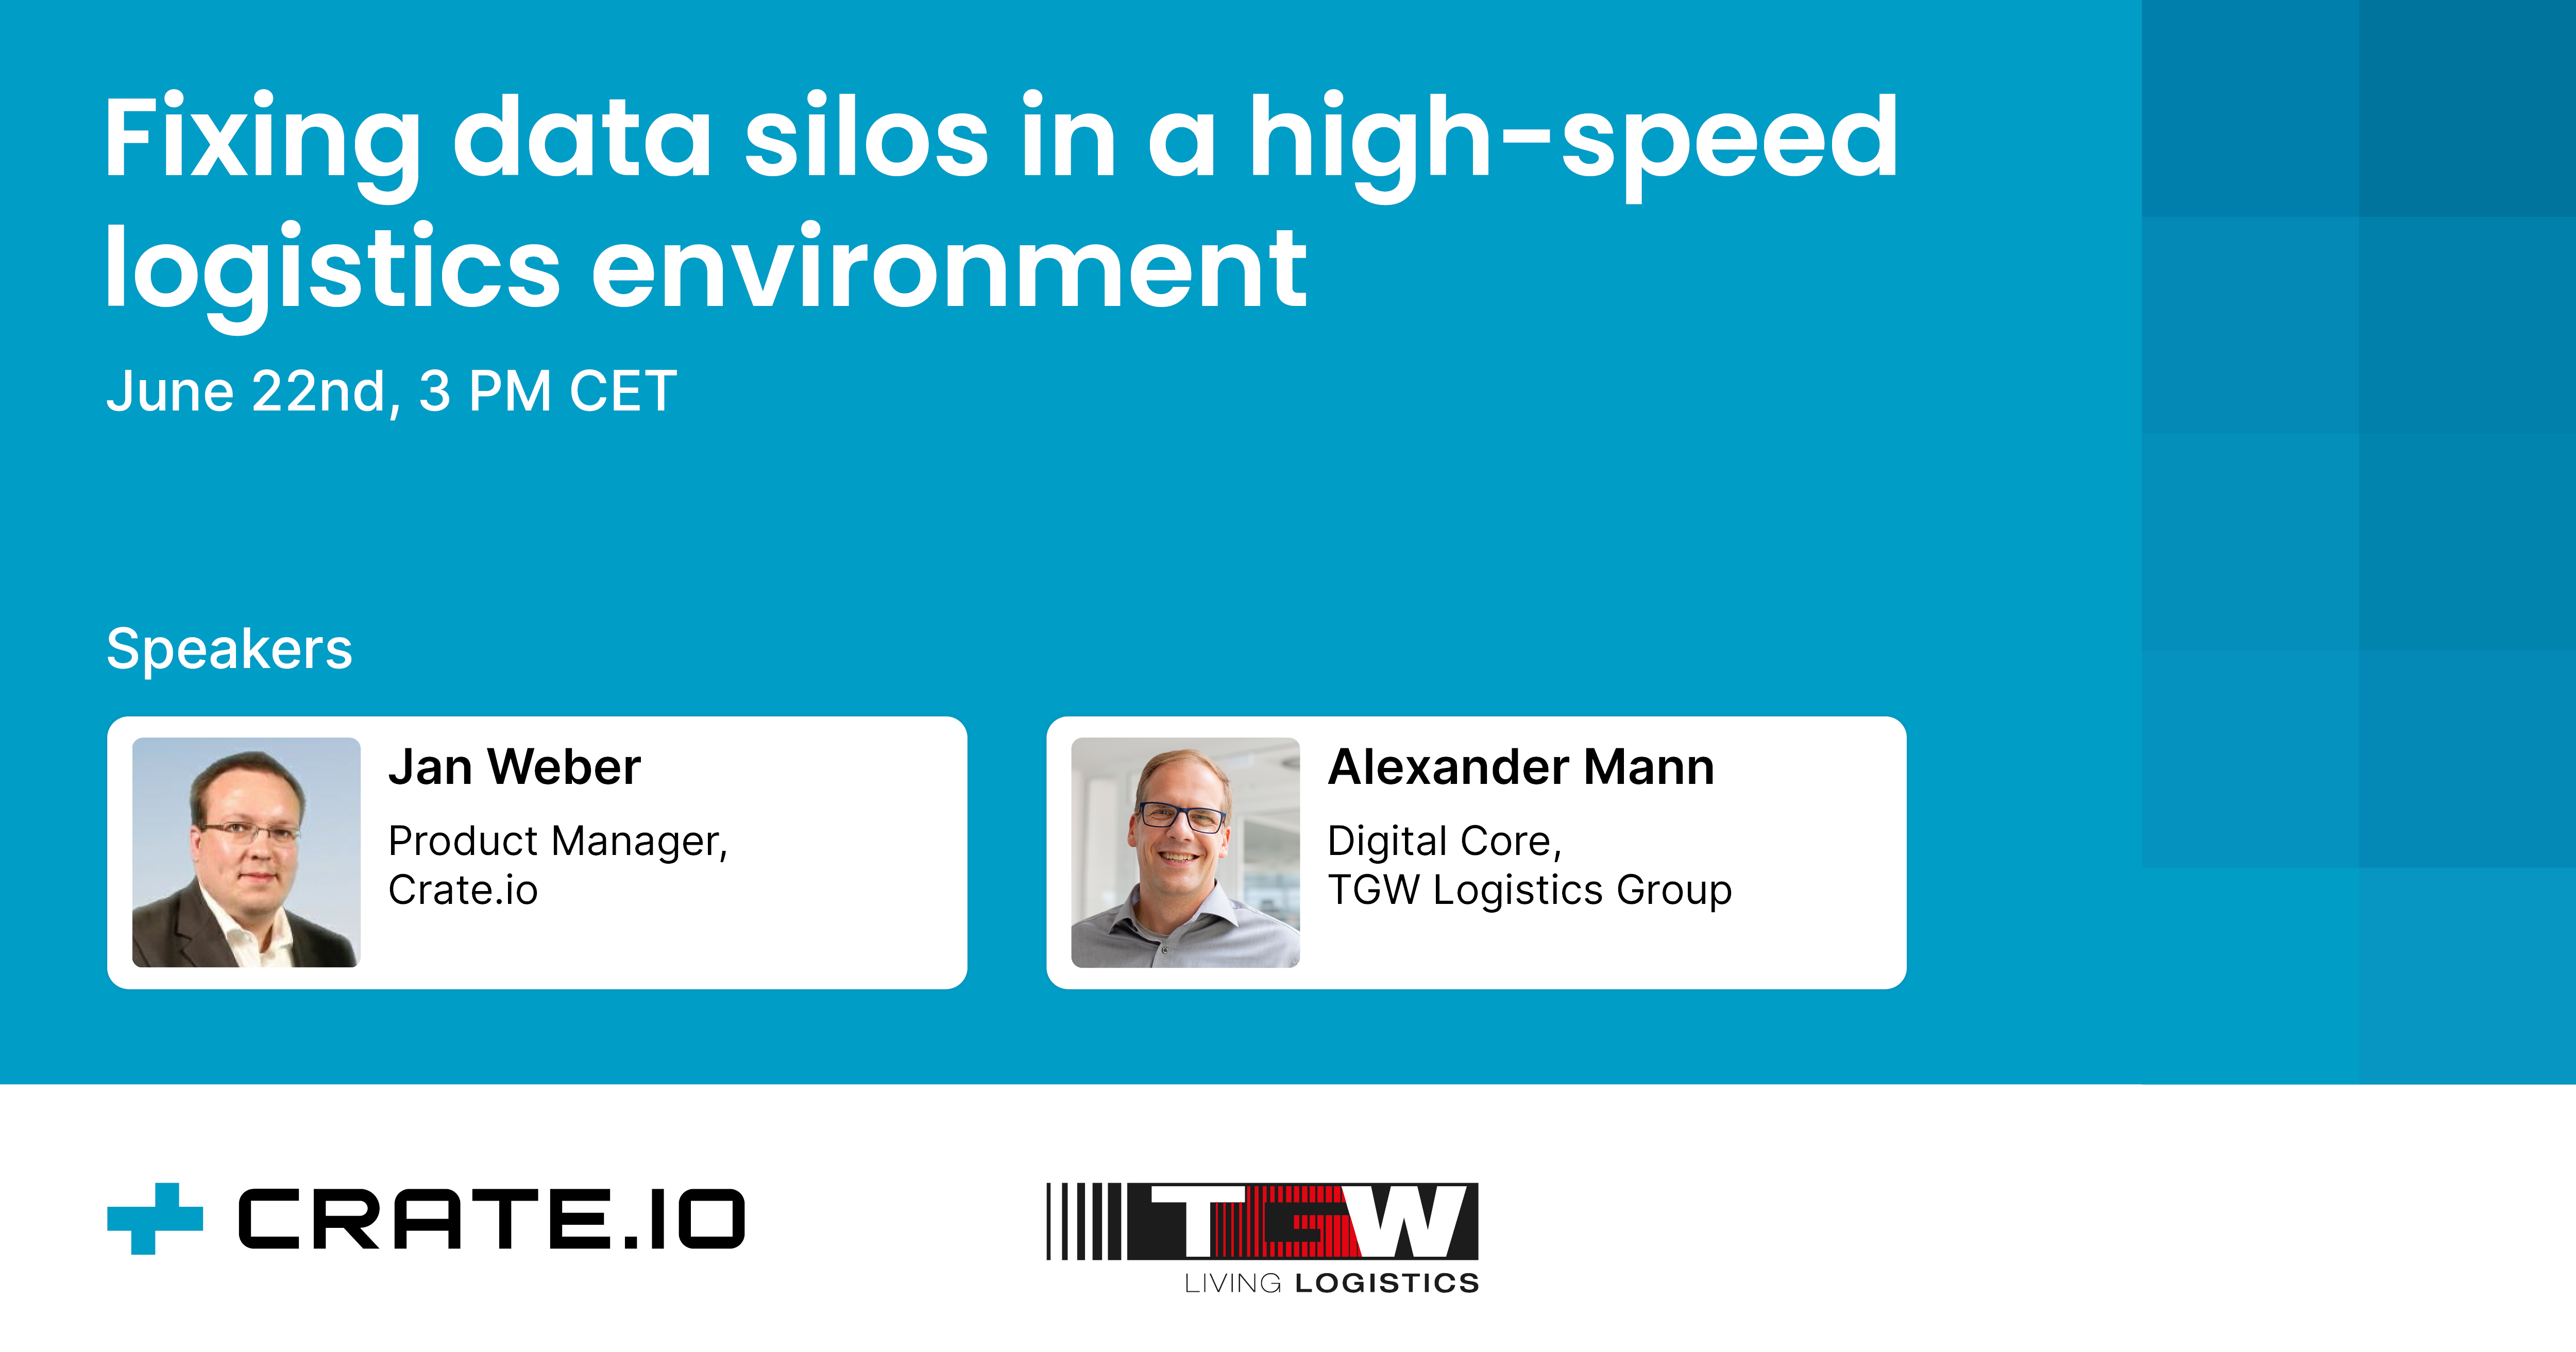  Fixing data silos in a high-speed logistics environment